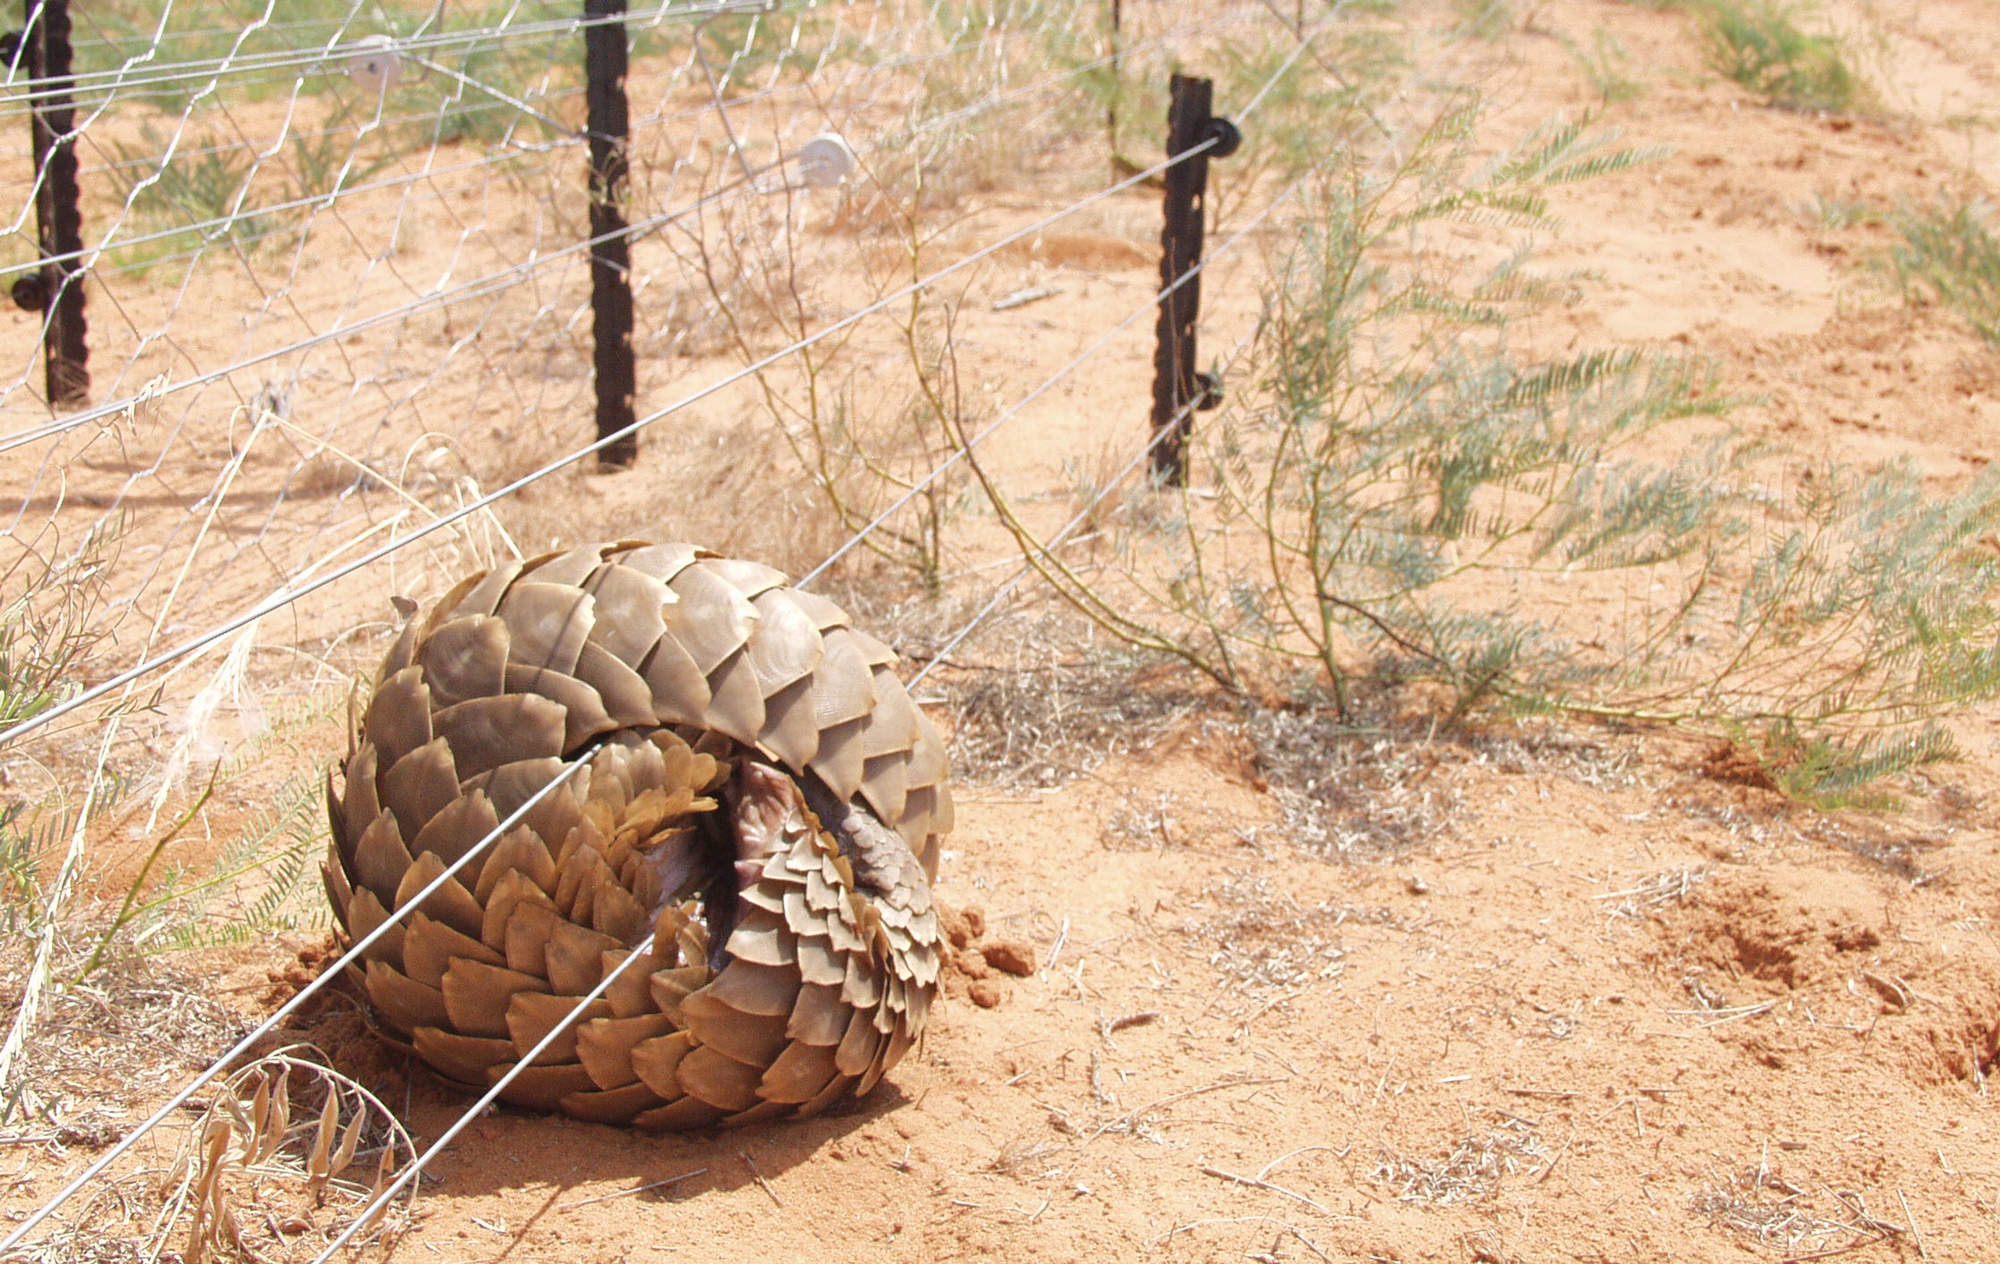 A ground pangolin caught up in an electric fence 